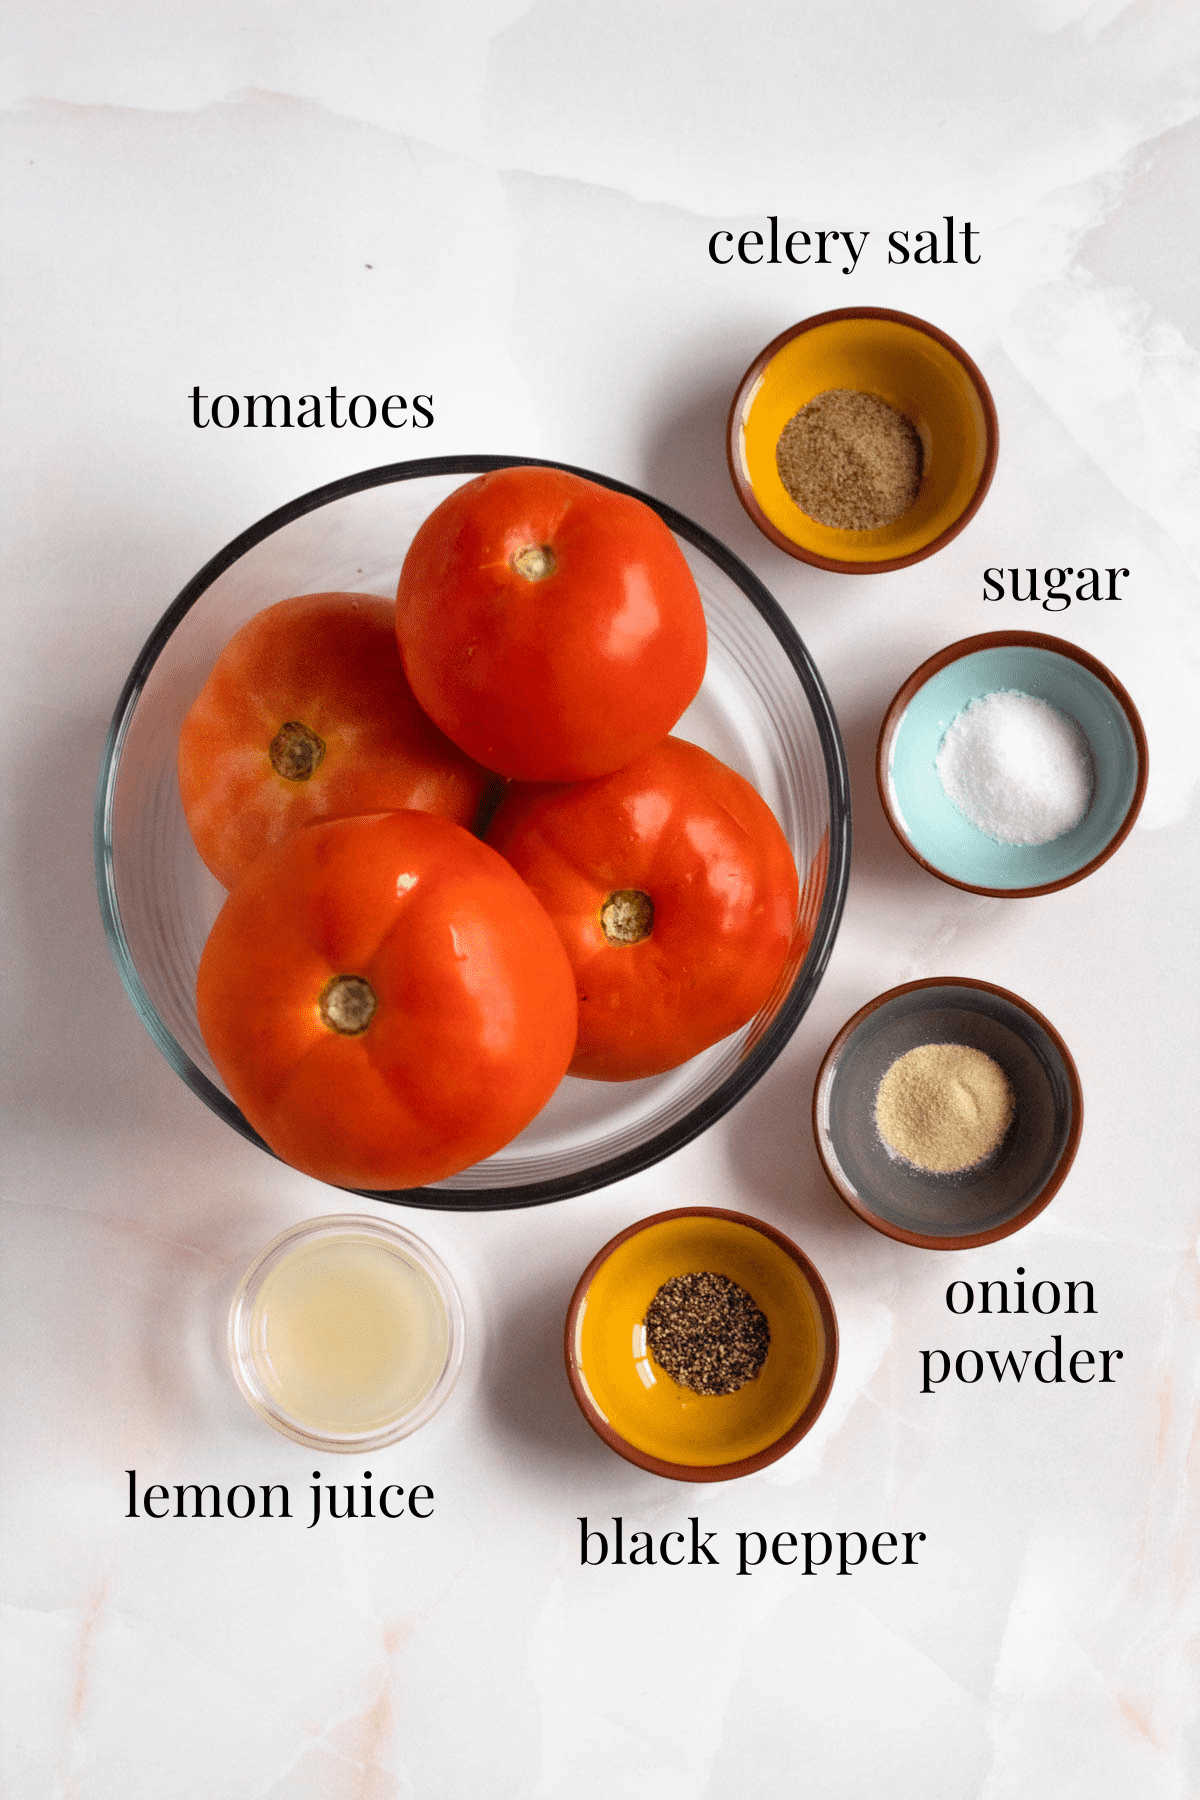 homemade tomato juice ingredients on a light colored background